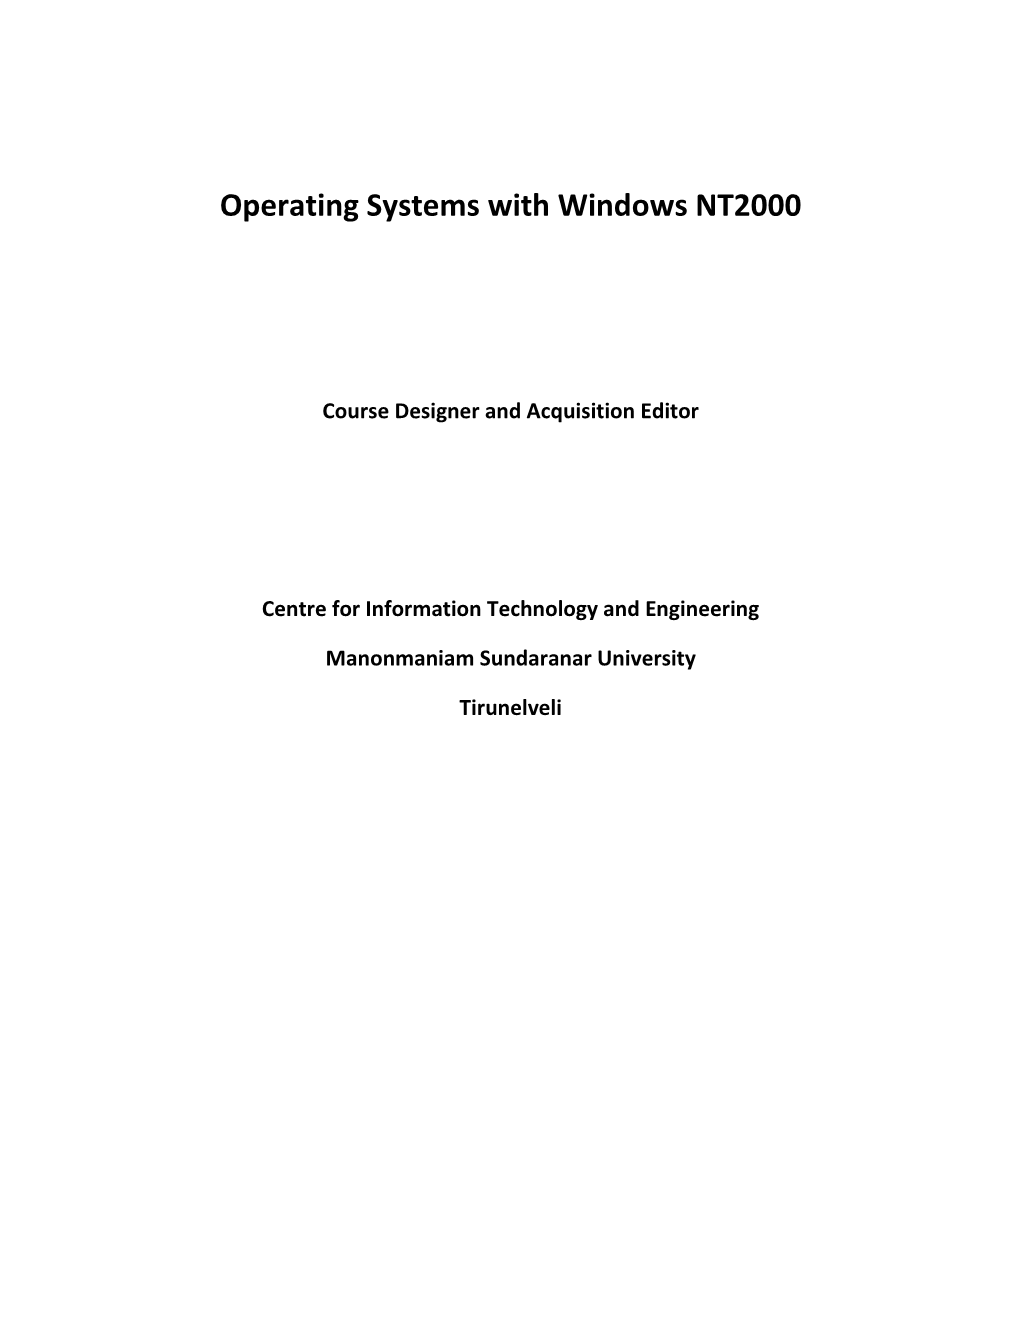 5.Operating Systems with Windows NT 2000